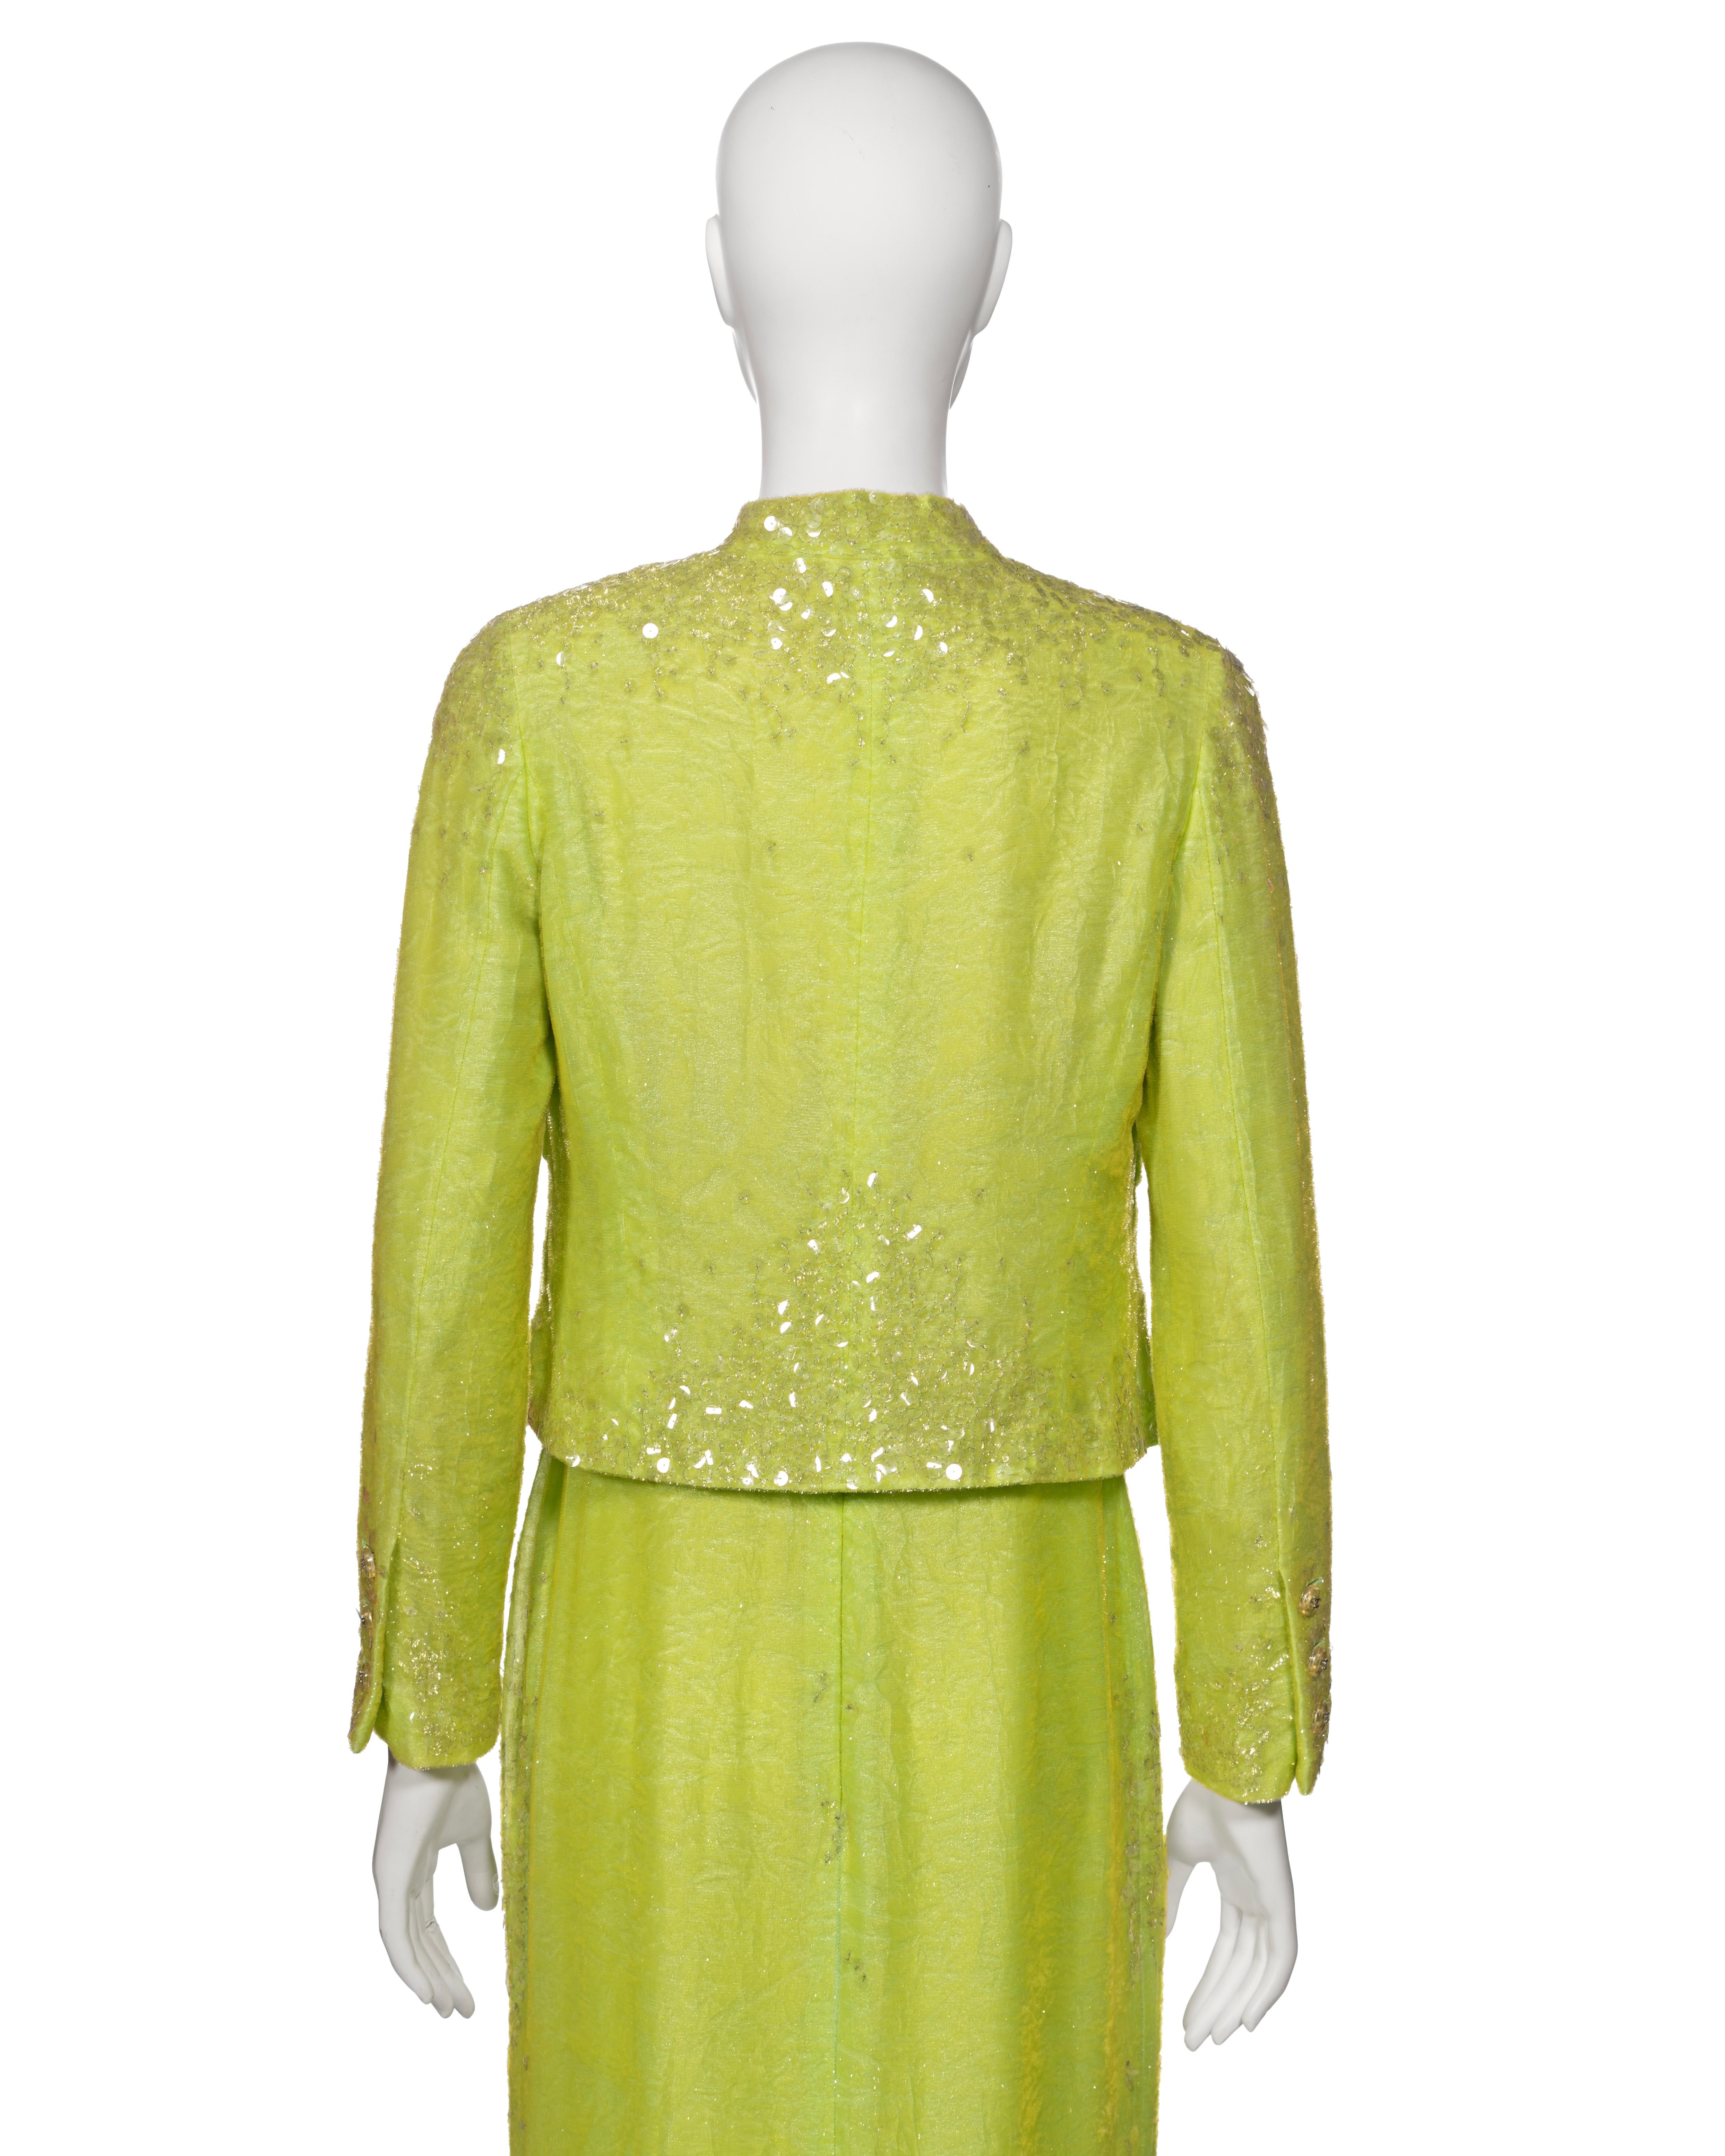 Chanel by Karl Lagerfeld Embellished Lime Green Velvet Dress and Jacket, ss 1997 For Sale 14